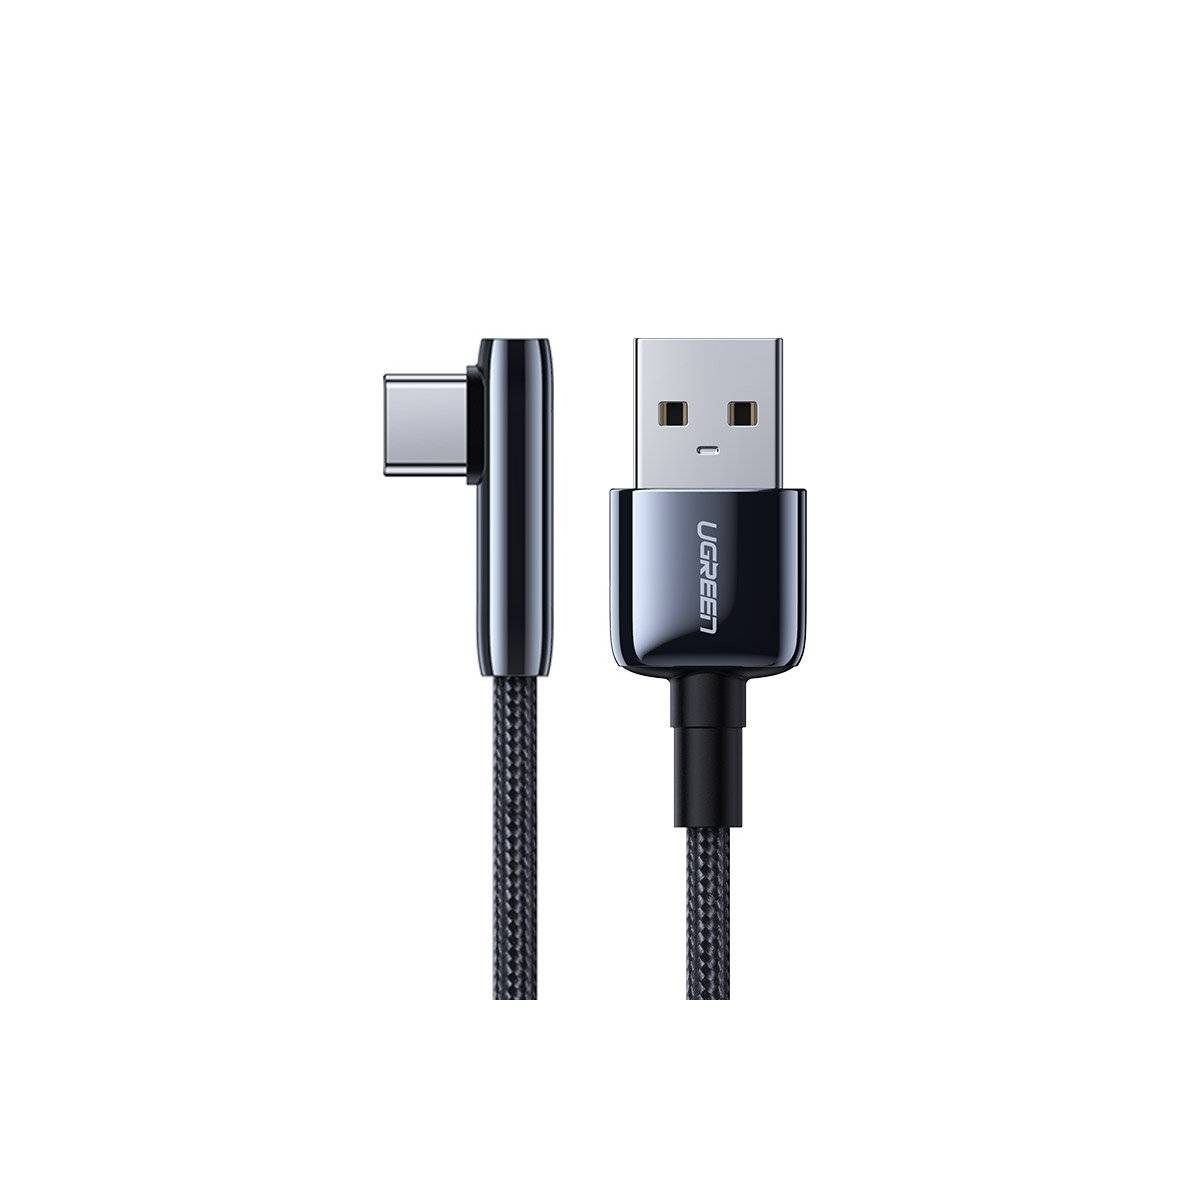 Ugreen Lightning To USB 2.0 A Male Cable 1m (Black) – Case Up